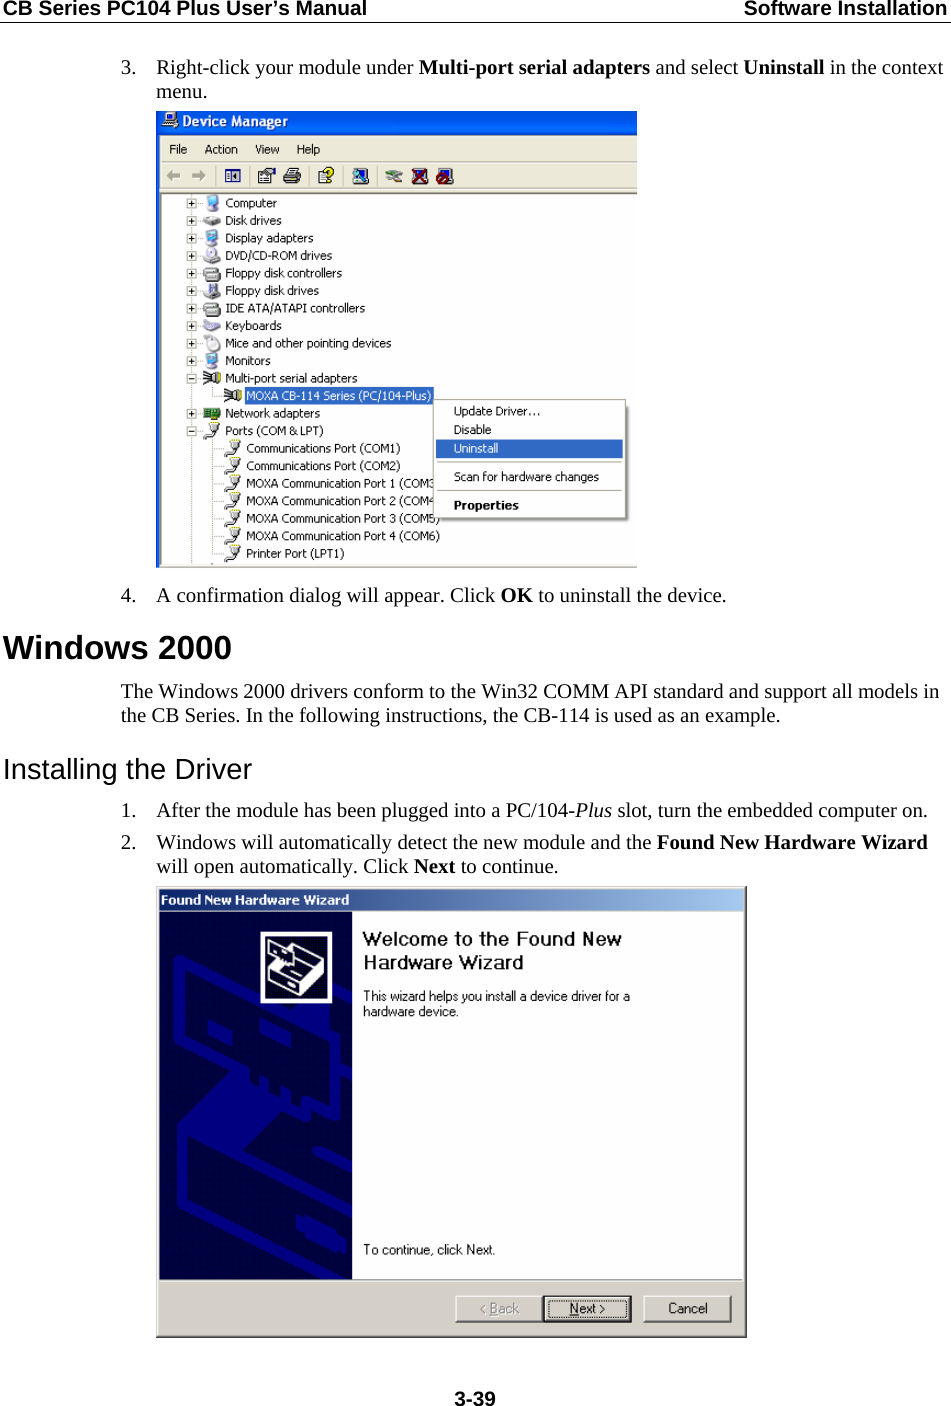 CB Series PC104 Plus User’s Manual  Software Installation 3. Right-click your module under Multi-port serial adapters and select Uninstall in the context menu.   4. A confirmation dialog will appear. Click OK to uninstall the device.   Windows 2000 The Windows 2000 drivers conform to the Win32 COMM API standard and support all models in the CB Series. In the following instructions, the CB-114 is used as an example. Installing the Driver 1. After the module has been plugged into a PC/104-Plus slot, turn the embedded computer on. 2. Windows will automatically detect the new module and the Found New Hardware Wizard will open automatically. Click Next to continue.   3-39